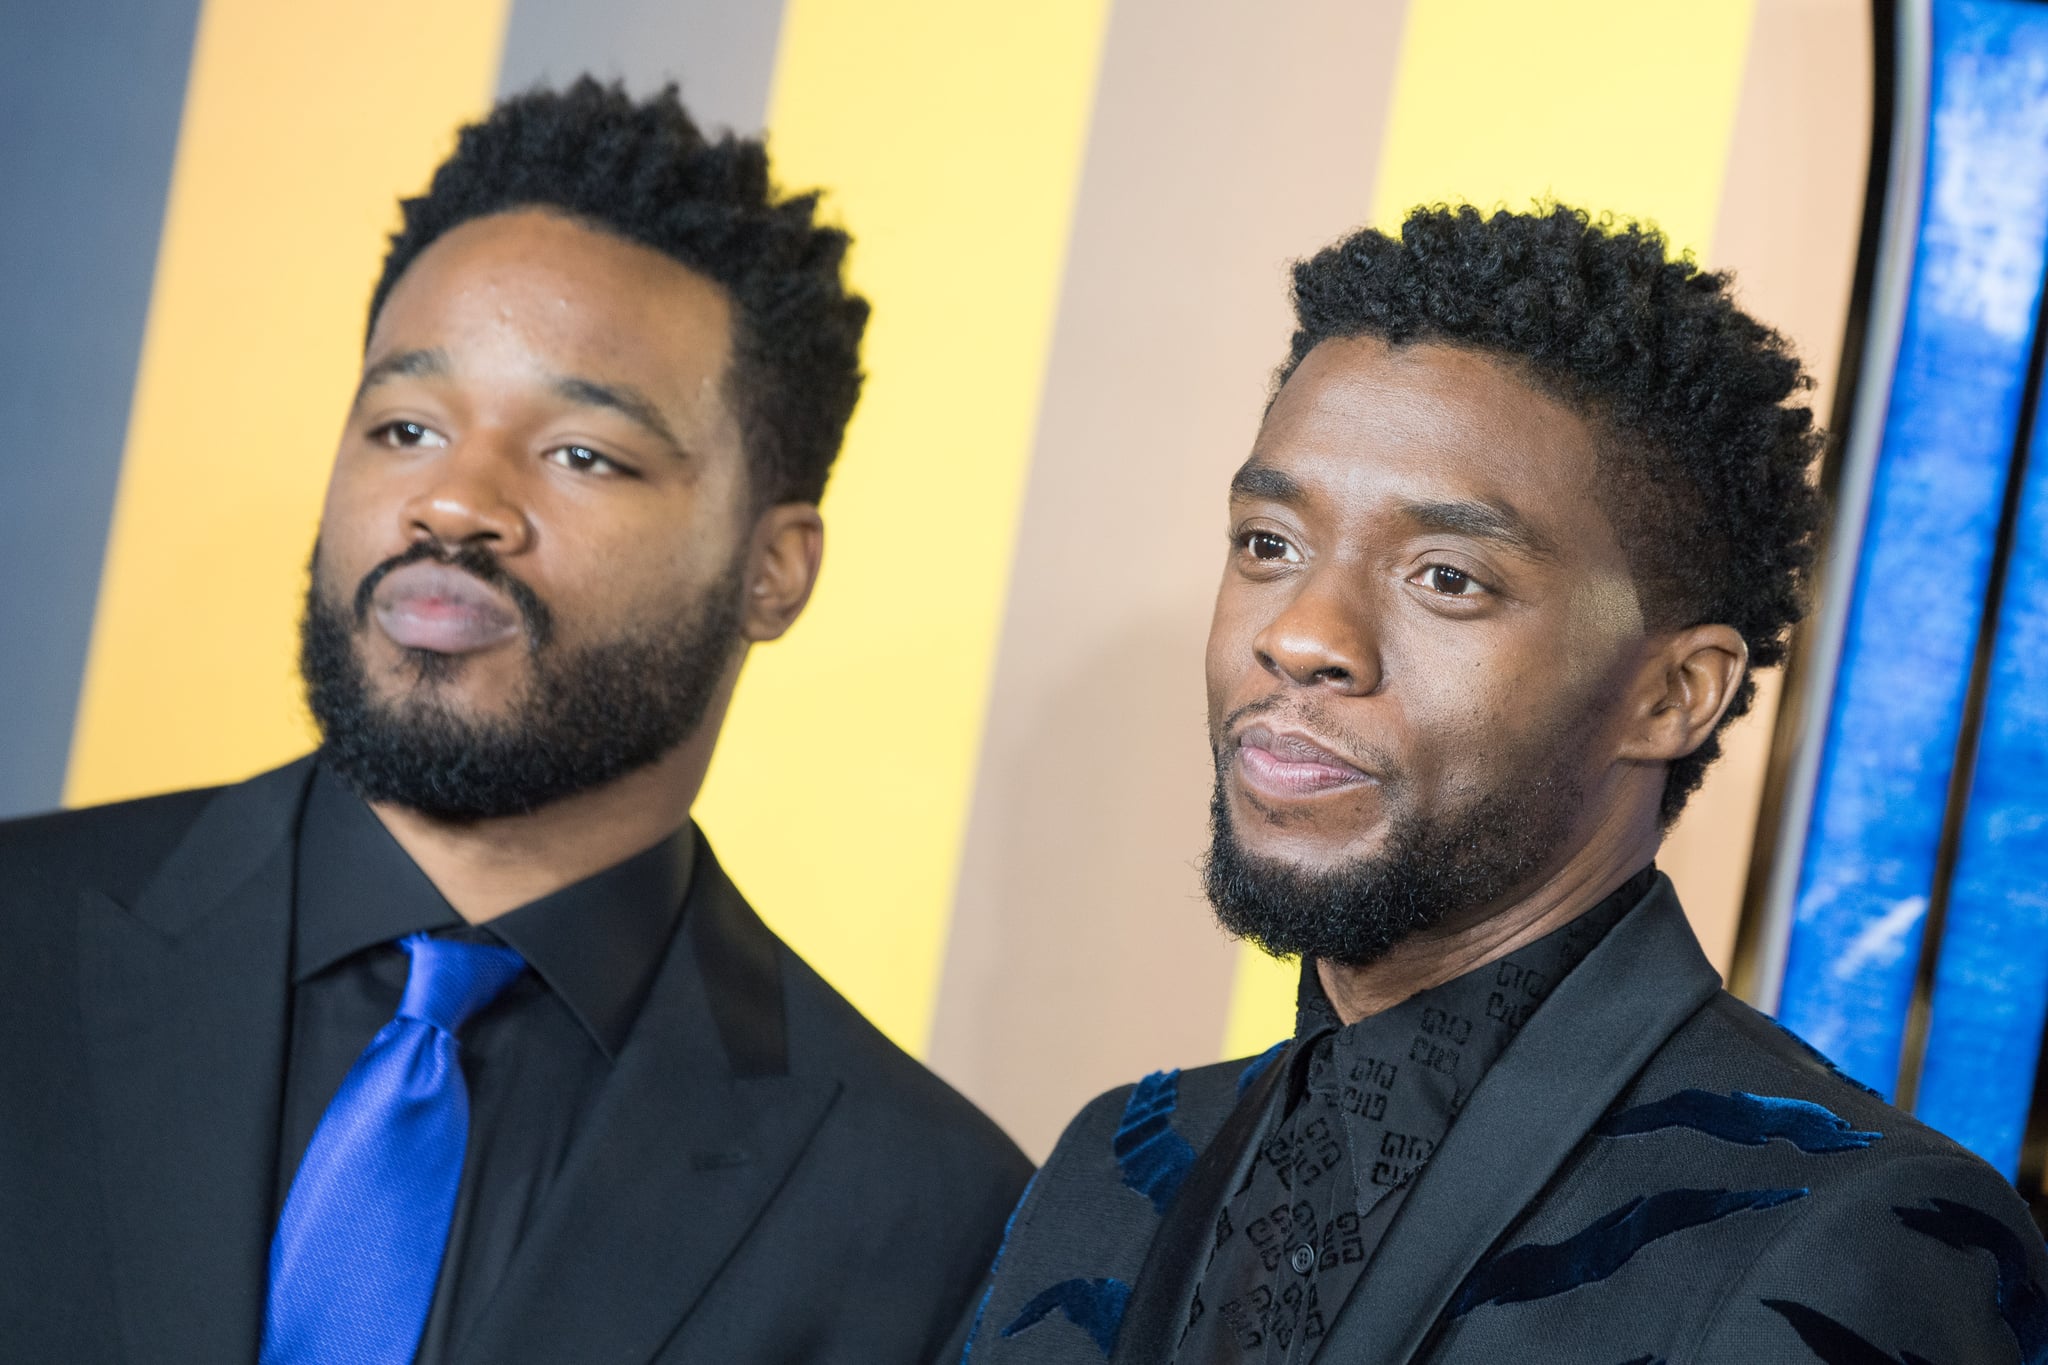 LONDON, ENGLAND - FEBRUARY 08:  (L-R) Ryan Coogler and Chadwick Boseman attend the European Premiere of 'Black Panther' at Eventim Apollo on February 8, 2018 in London, England.  (Photo by Jeff Spicer/FilmMagic)